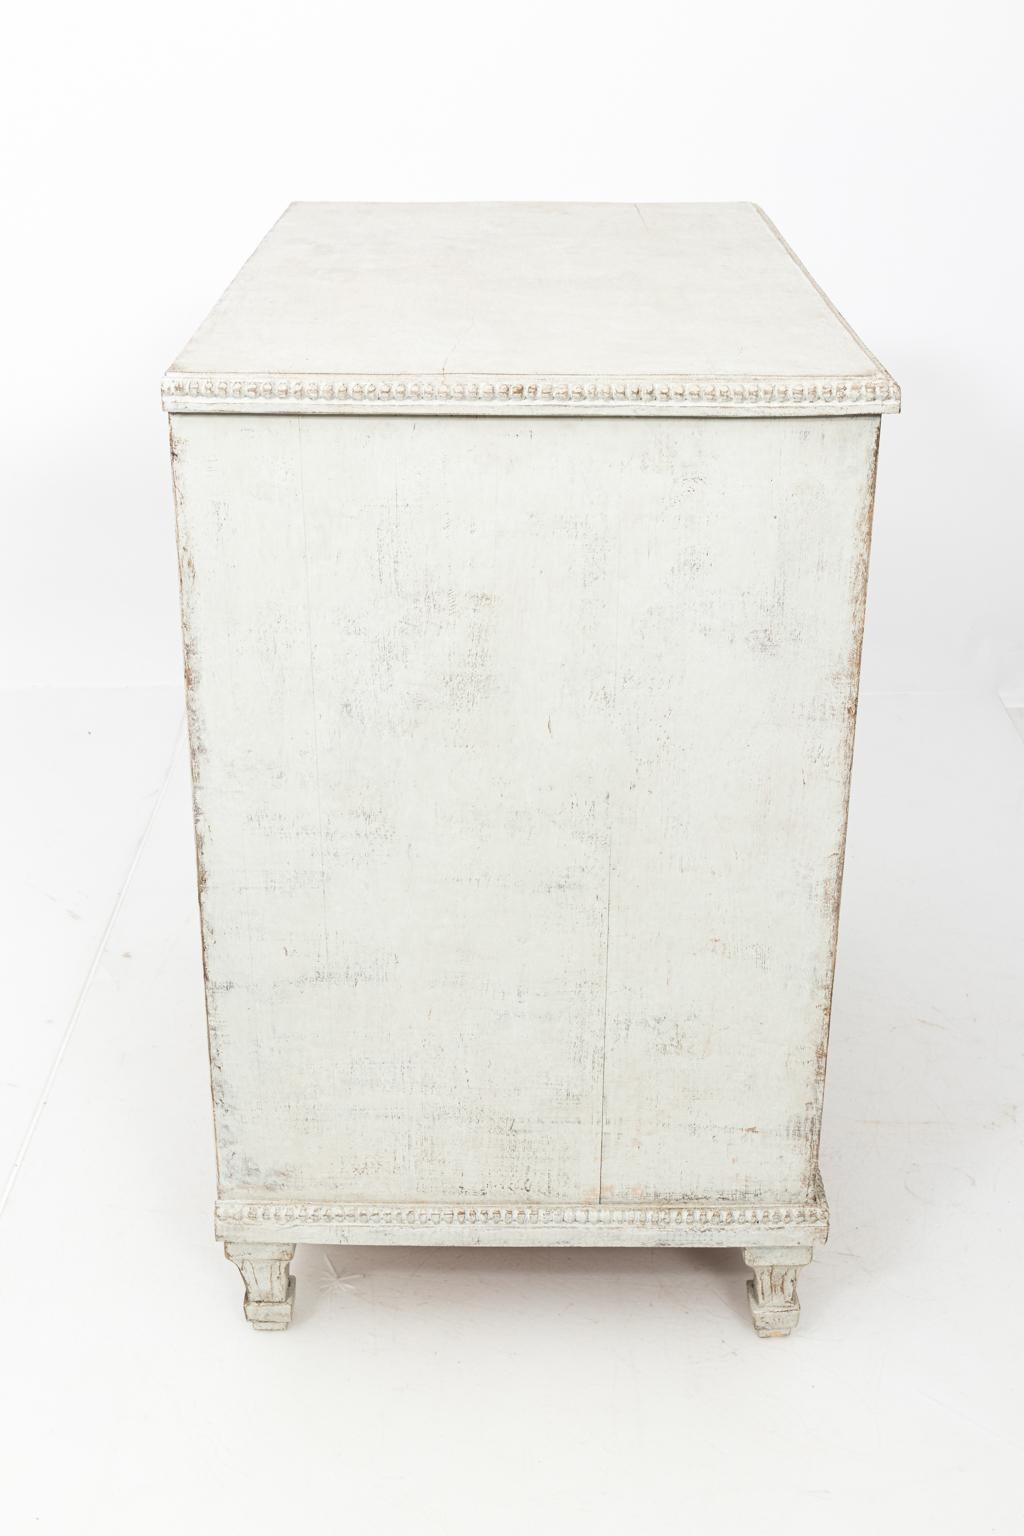 Pair of painted Swedish Gustavian style chests with three drawers and dentil trim, circa 19th century. The piece also features metal pulls. Please note of wear consistent with age.